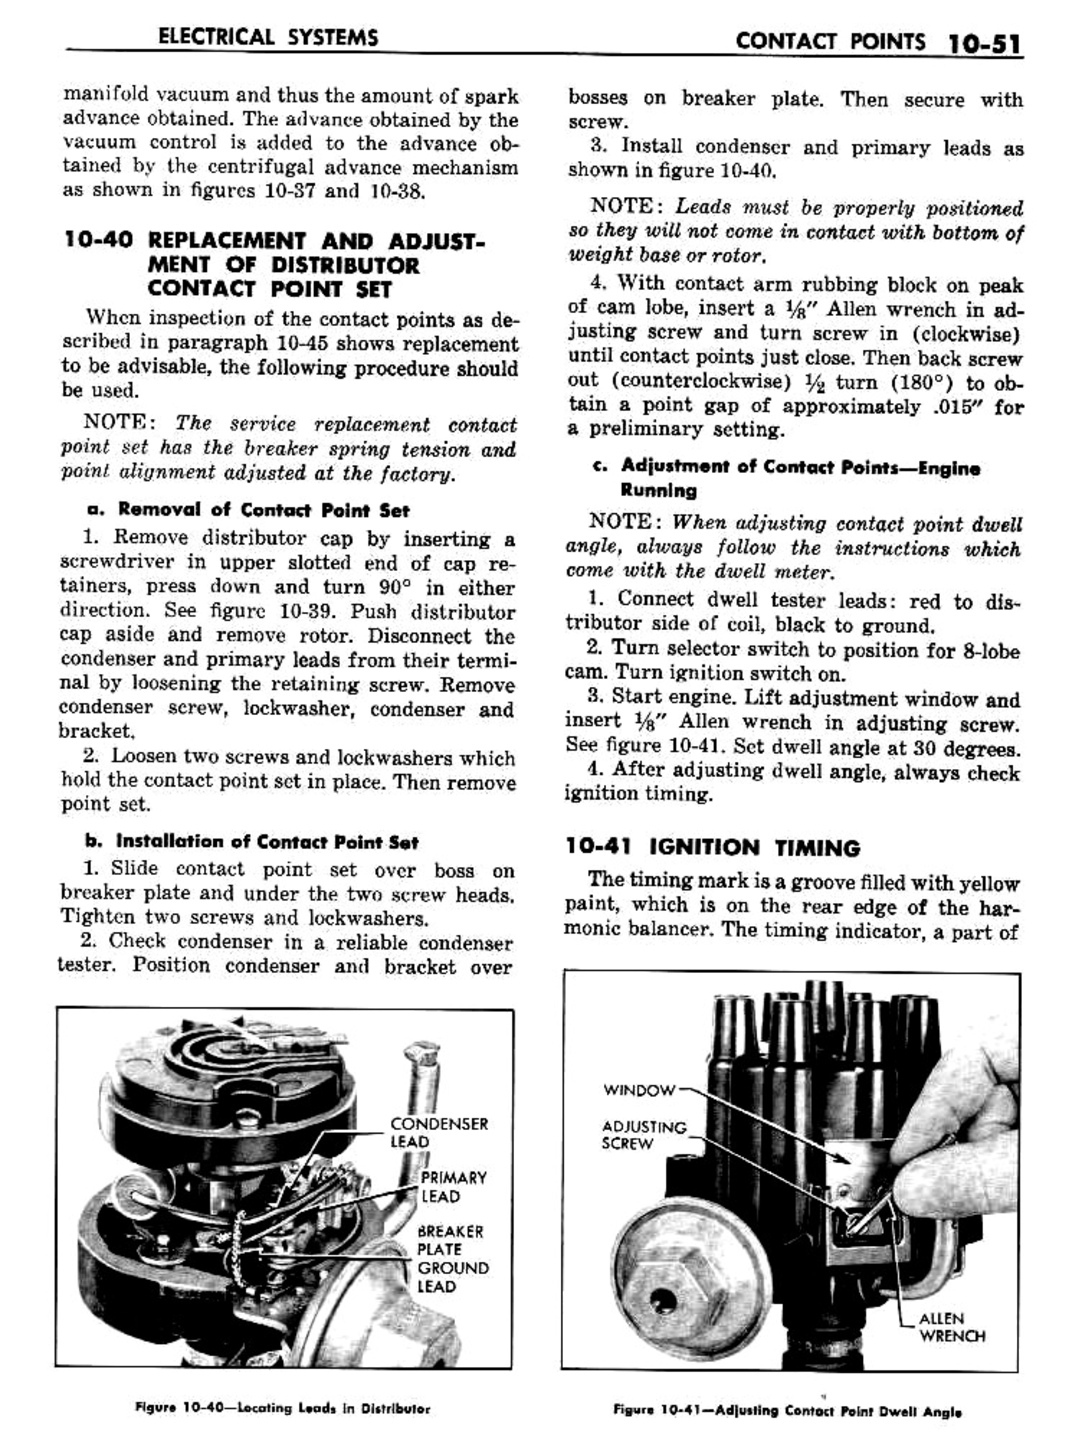 n_11 1960 Buick Shop Manual - Electrical Systems-051-051.jpg